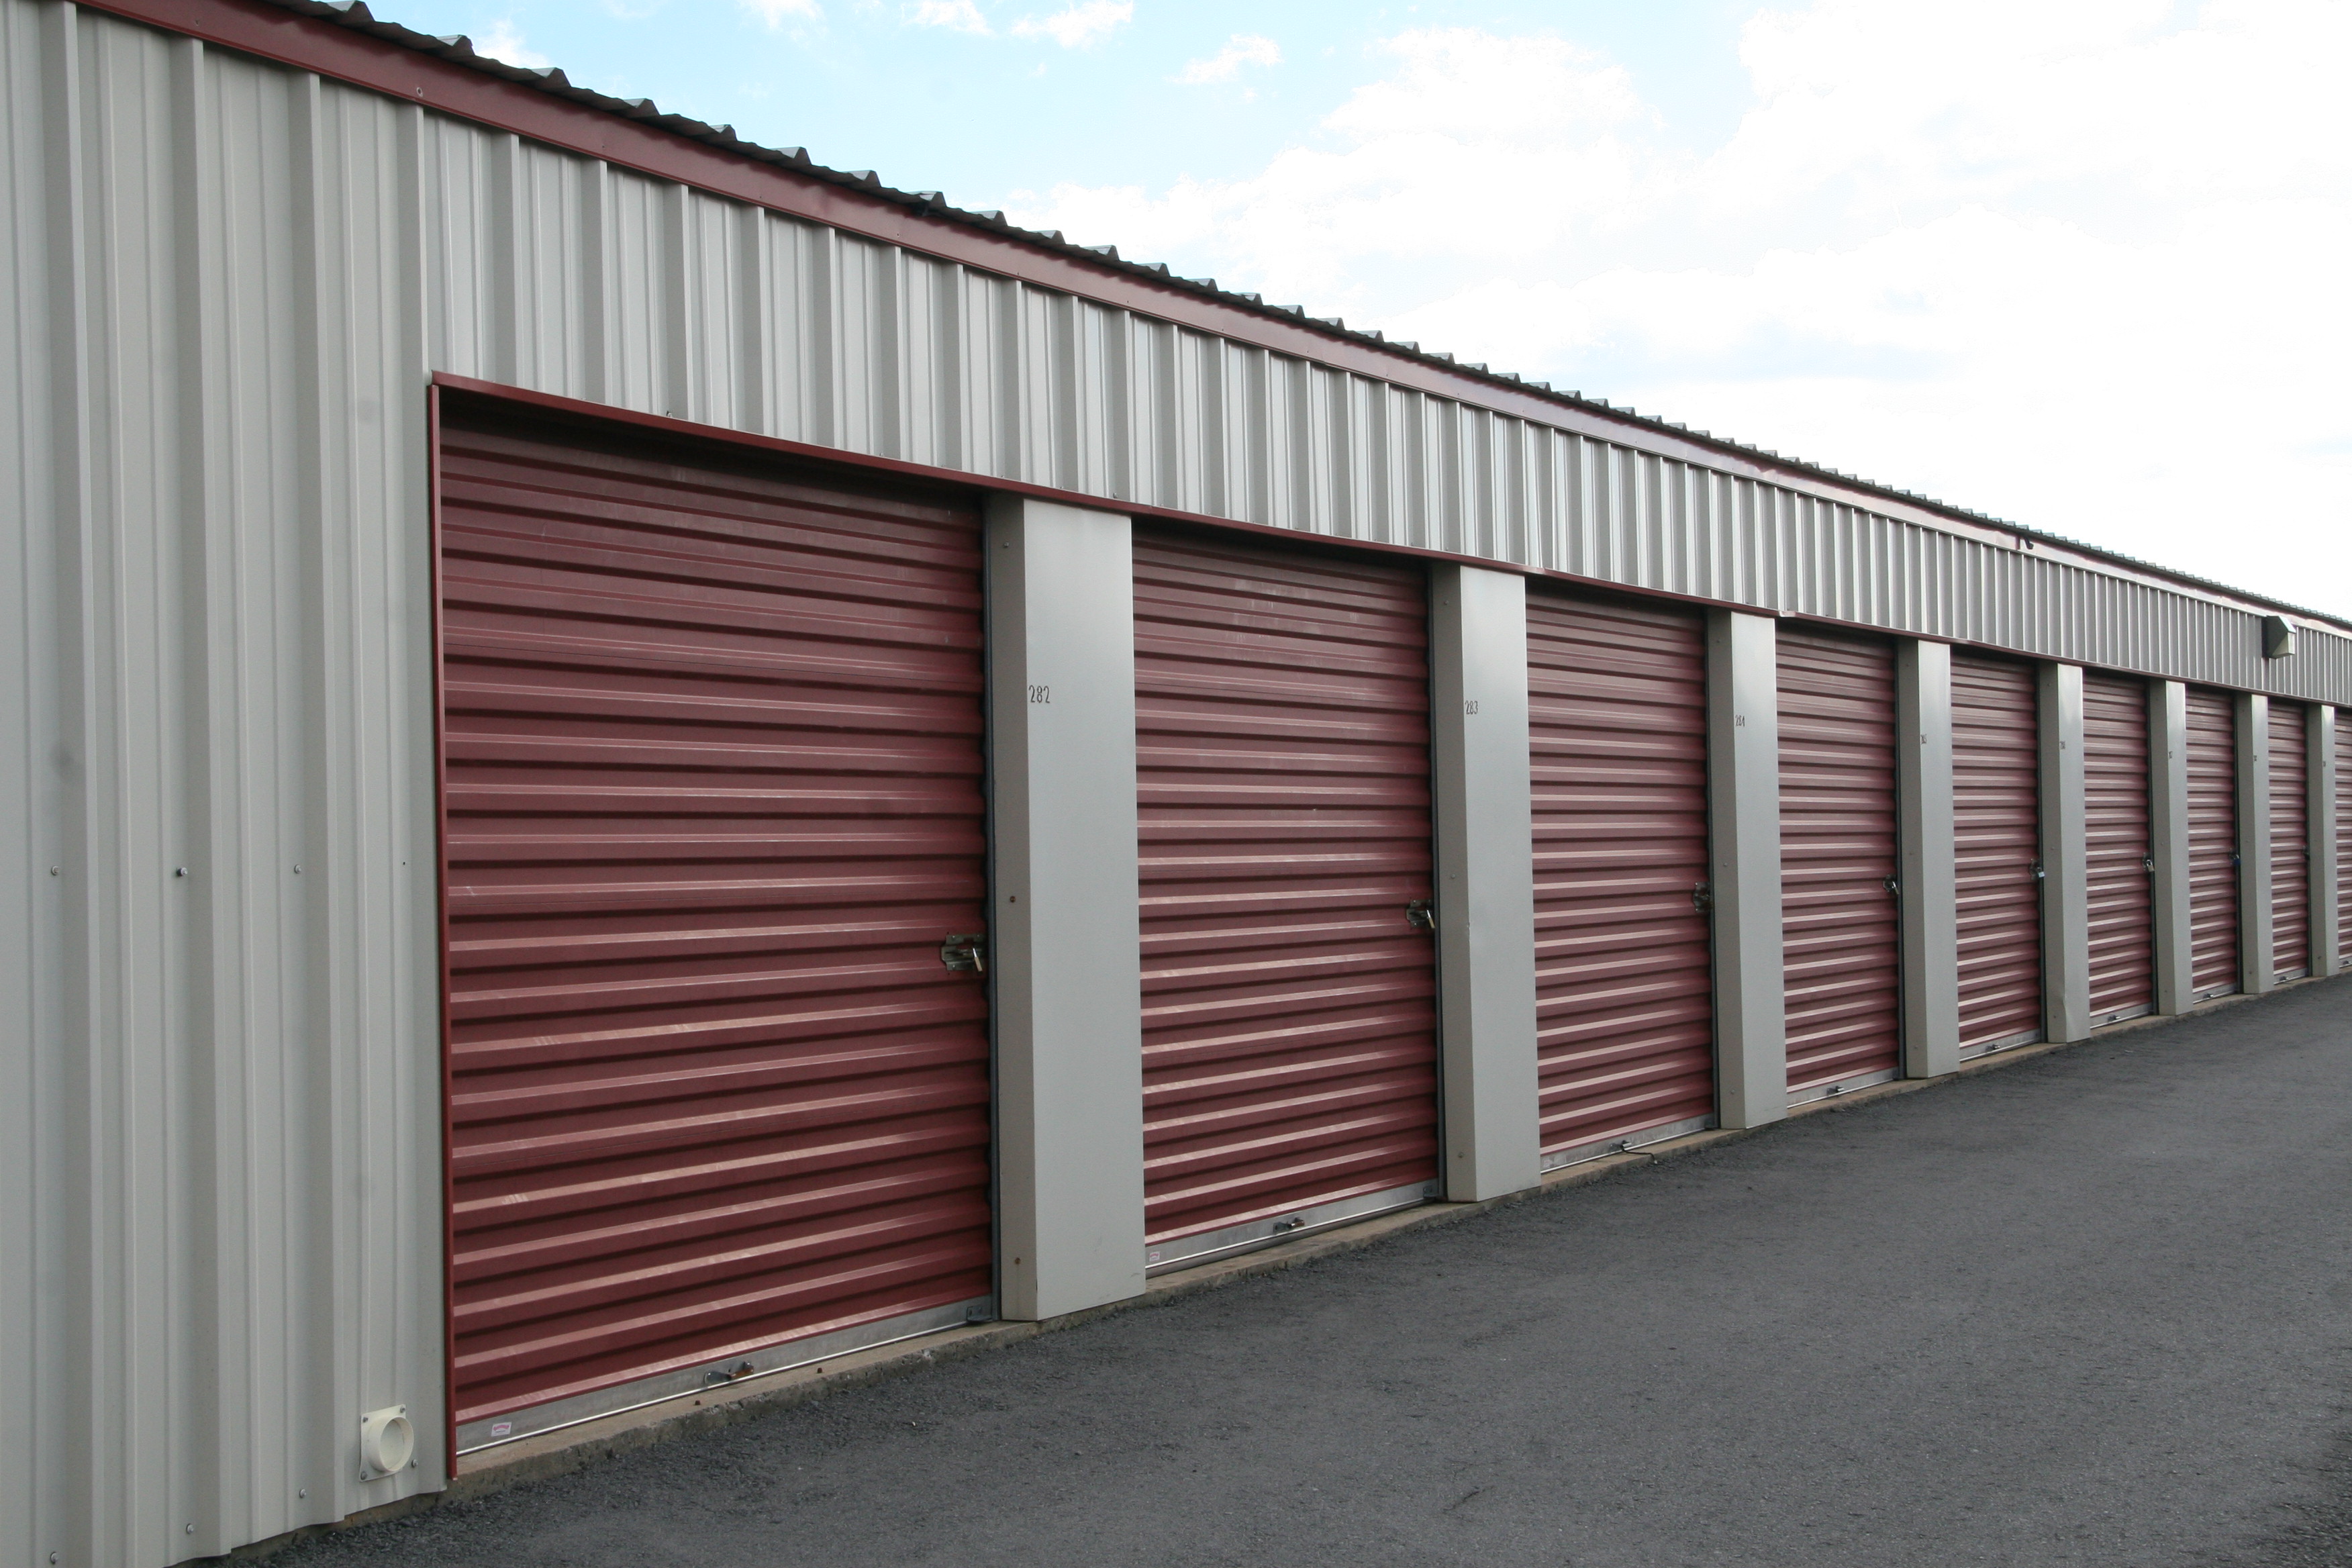 How To Choose a Storage Unit for Your Items